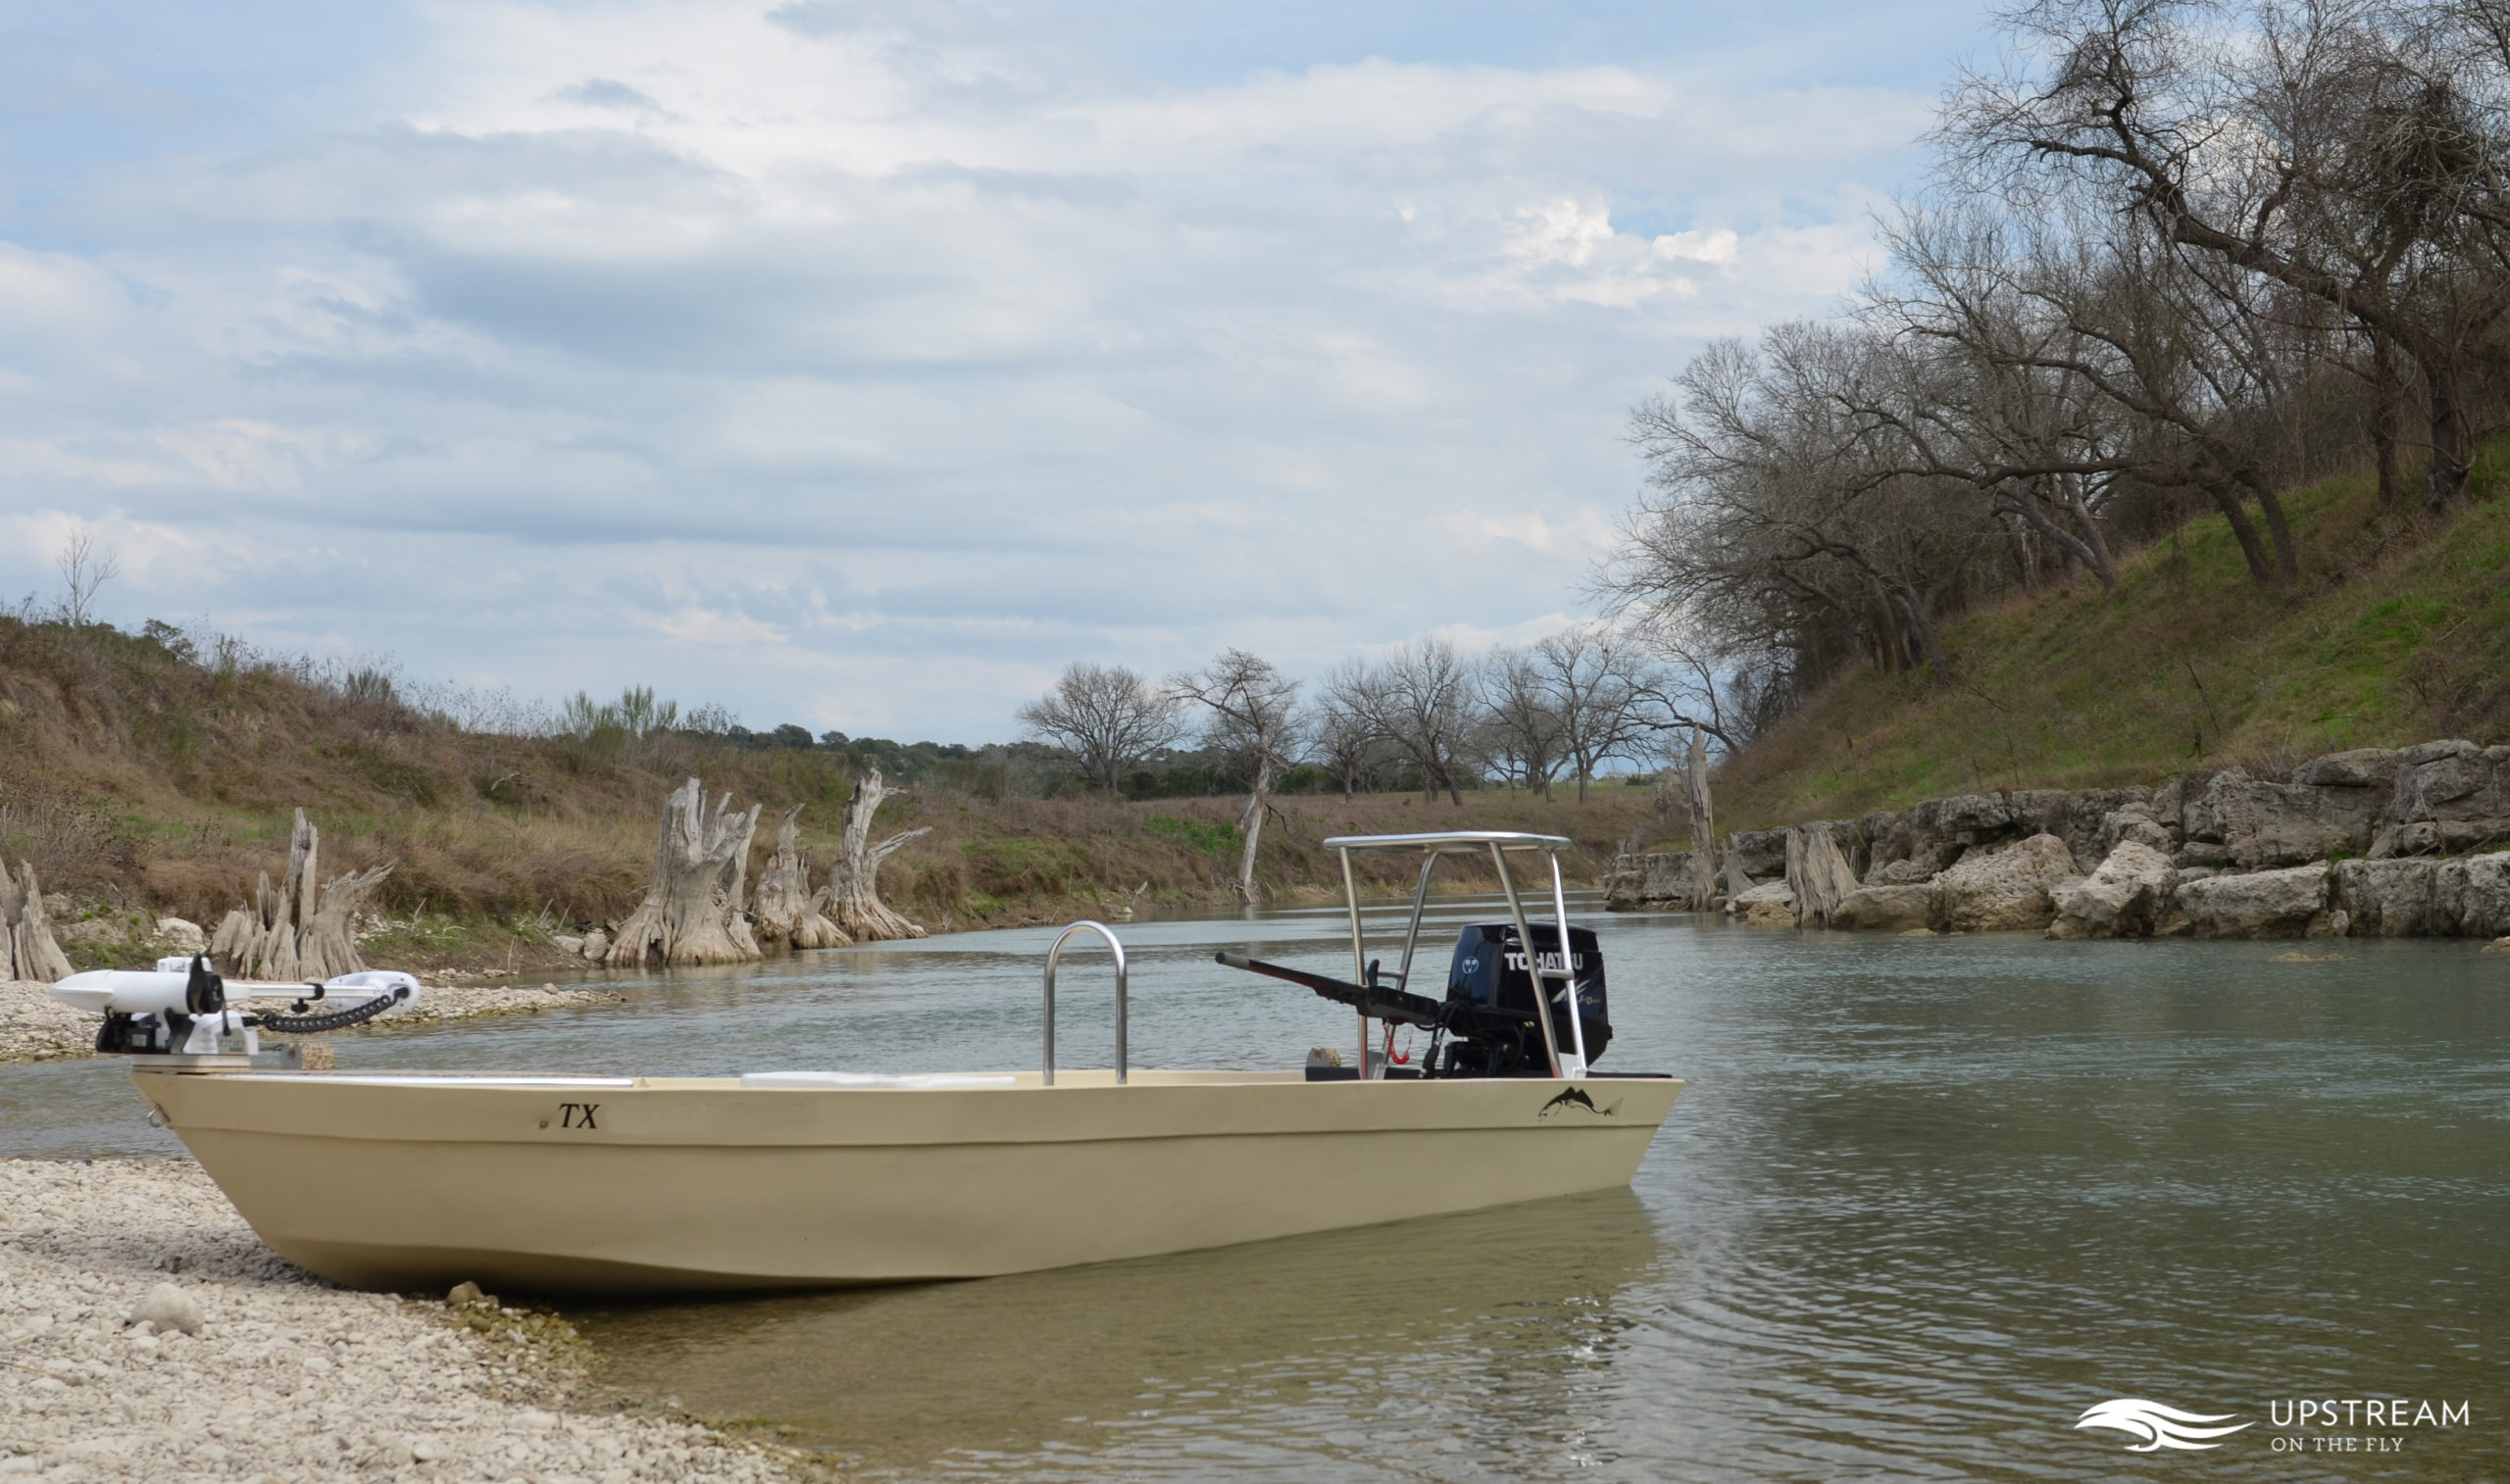 Hog Island Skiff used for North Texas Fly Fishing Guide Greg Welander of Upstream On The Fly